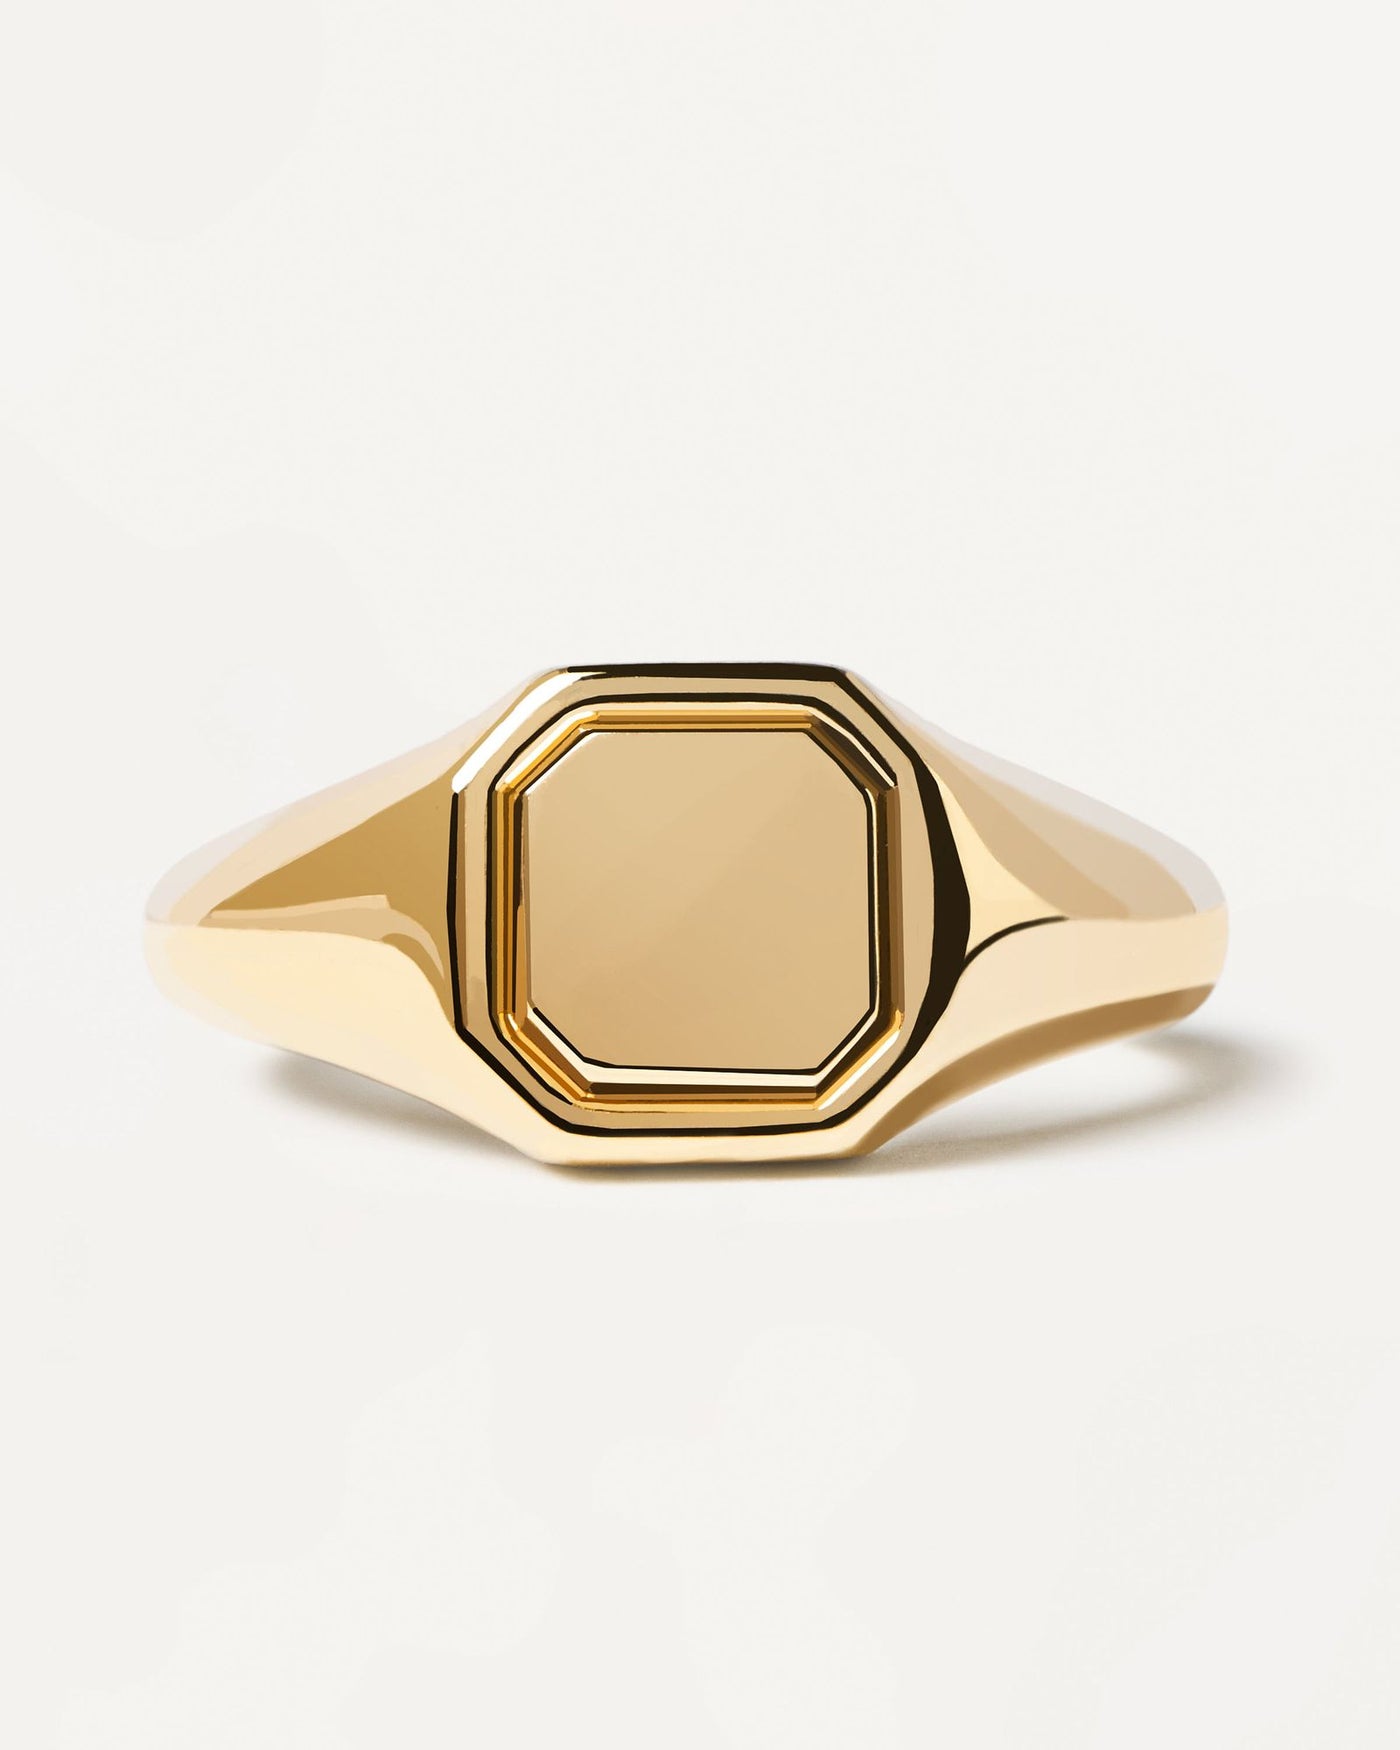 2024 Selection | Octet Stamp Ring. Engravable octagonal gold-plated signet ring. Get the latest arrival from PDPAOLA. Place your order safely and get this Best Seller. Free Shipping.